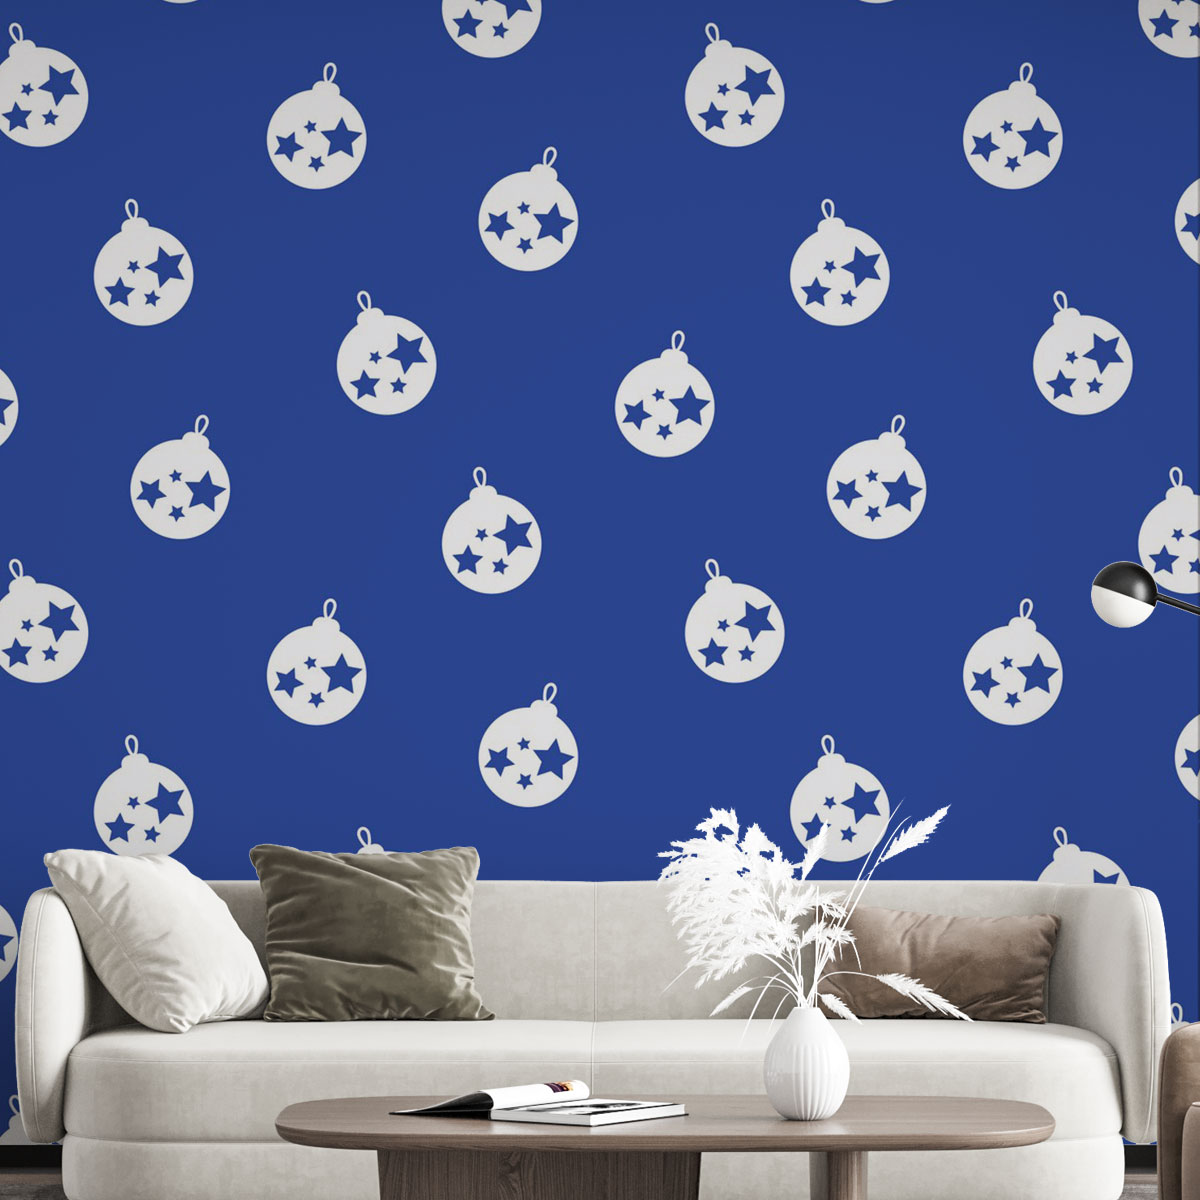 Christmas Balls On The Navy Blue Background Wall Mural